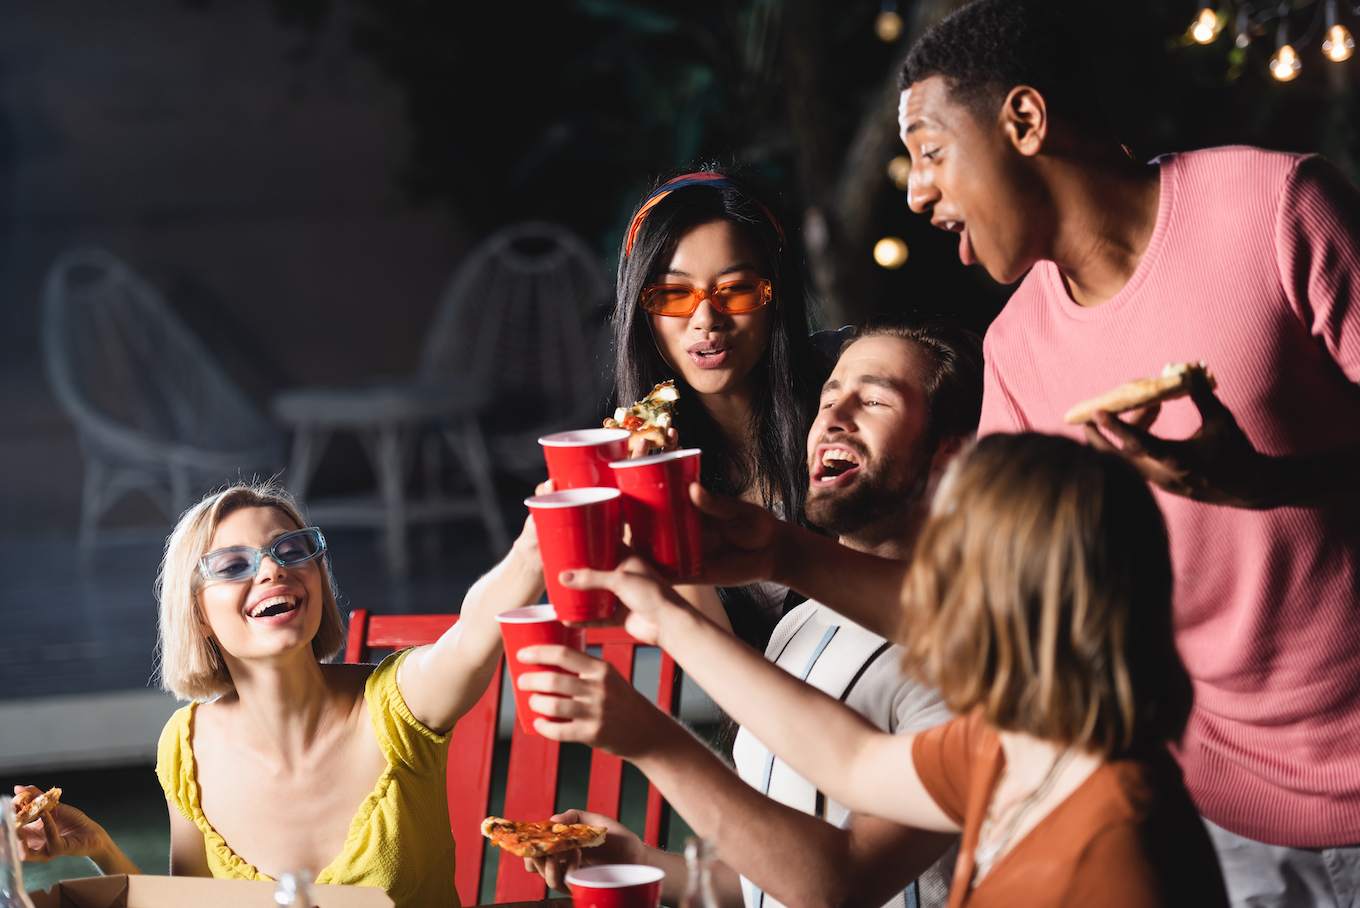 A group of friends toast red plastic cups and eat pizza with chairs and lights in the background.